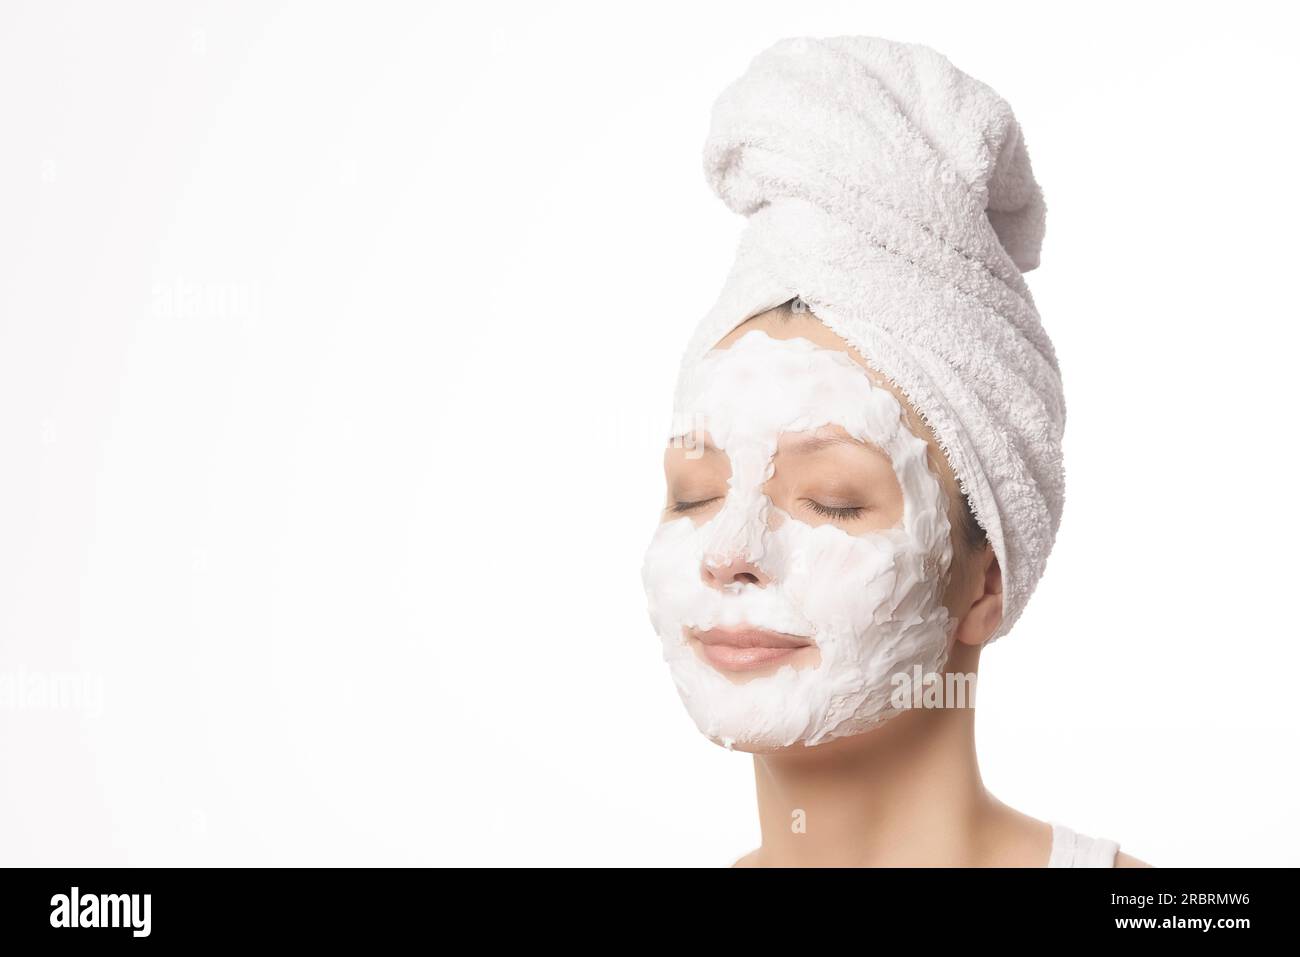 Relaxed woman with her hair tied up in a white towel and a deep cleansing nourishing face mask applied to her face, beauty and skincare concept Stock Photo